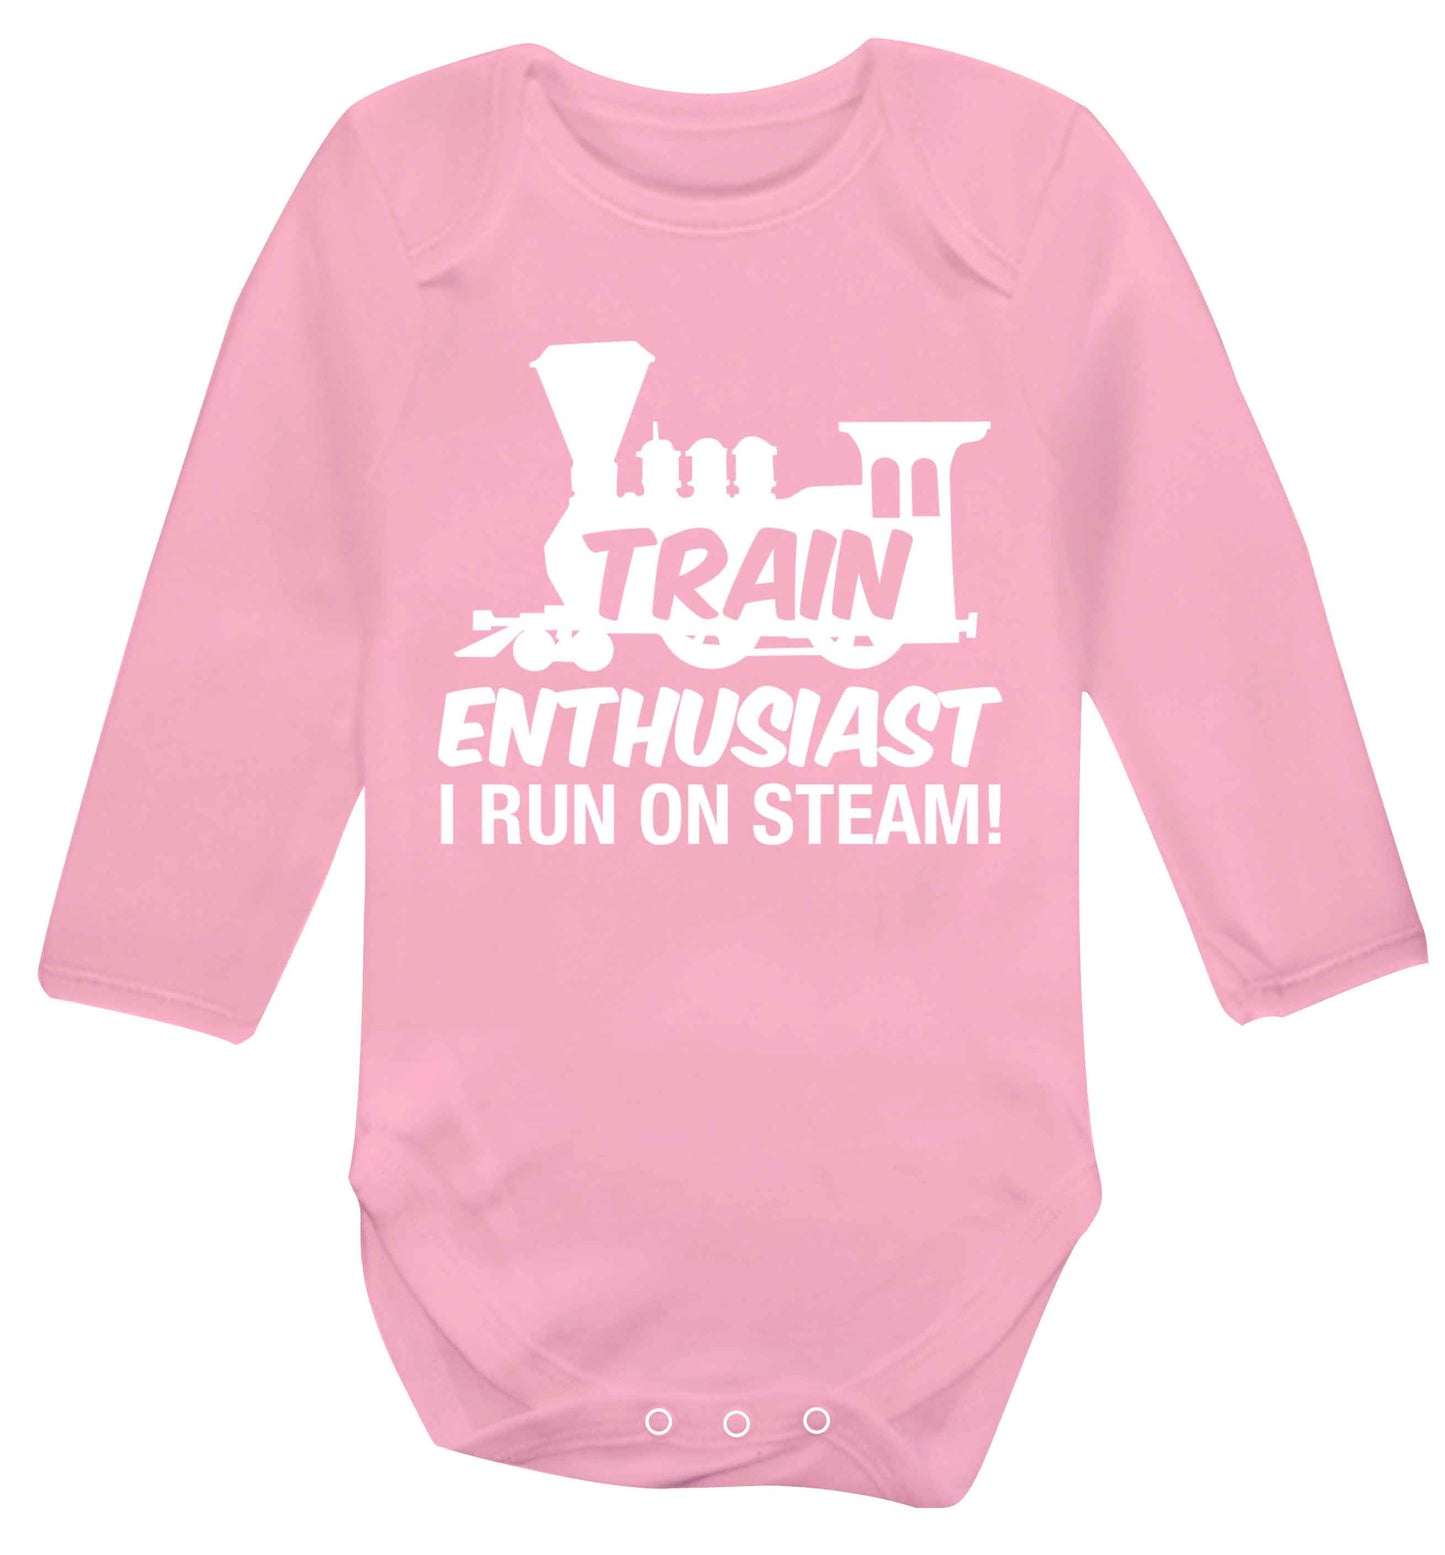 Train enthusiast I run on steam Baby Vest long sleeved pale pink 6-12 months